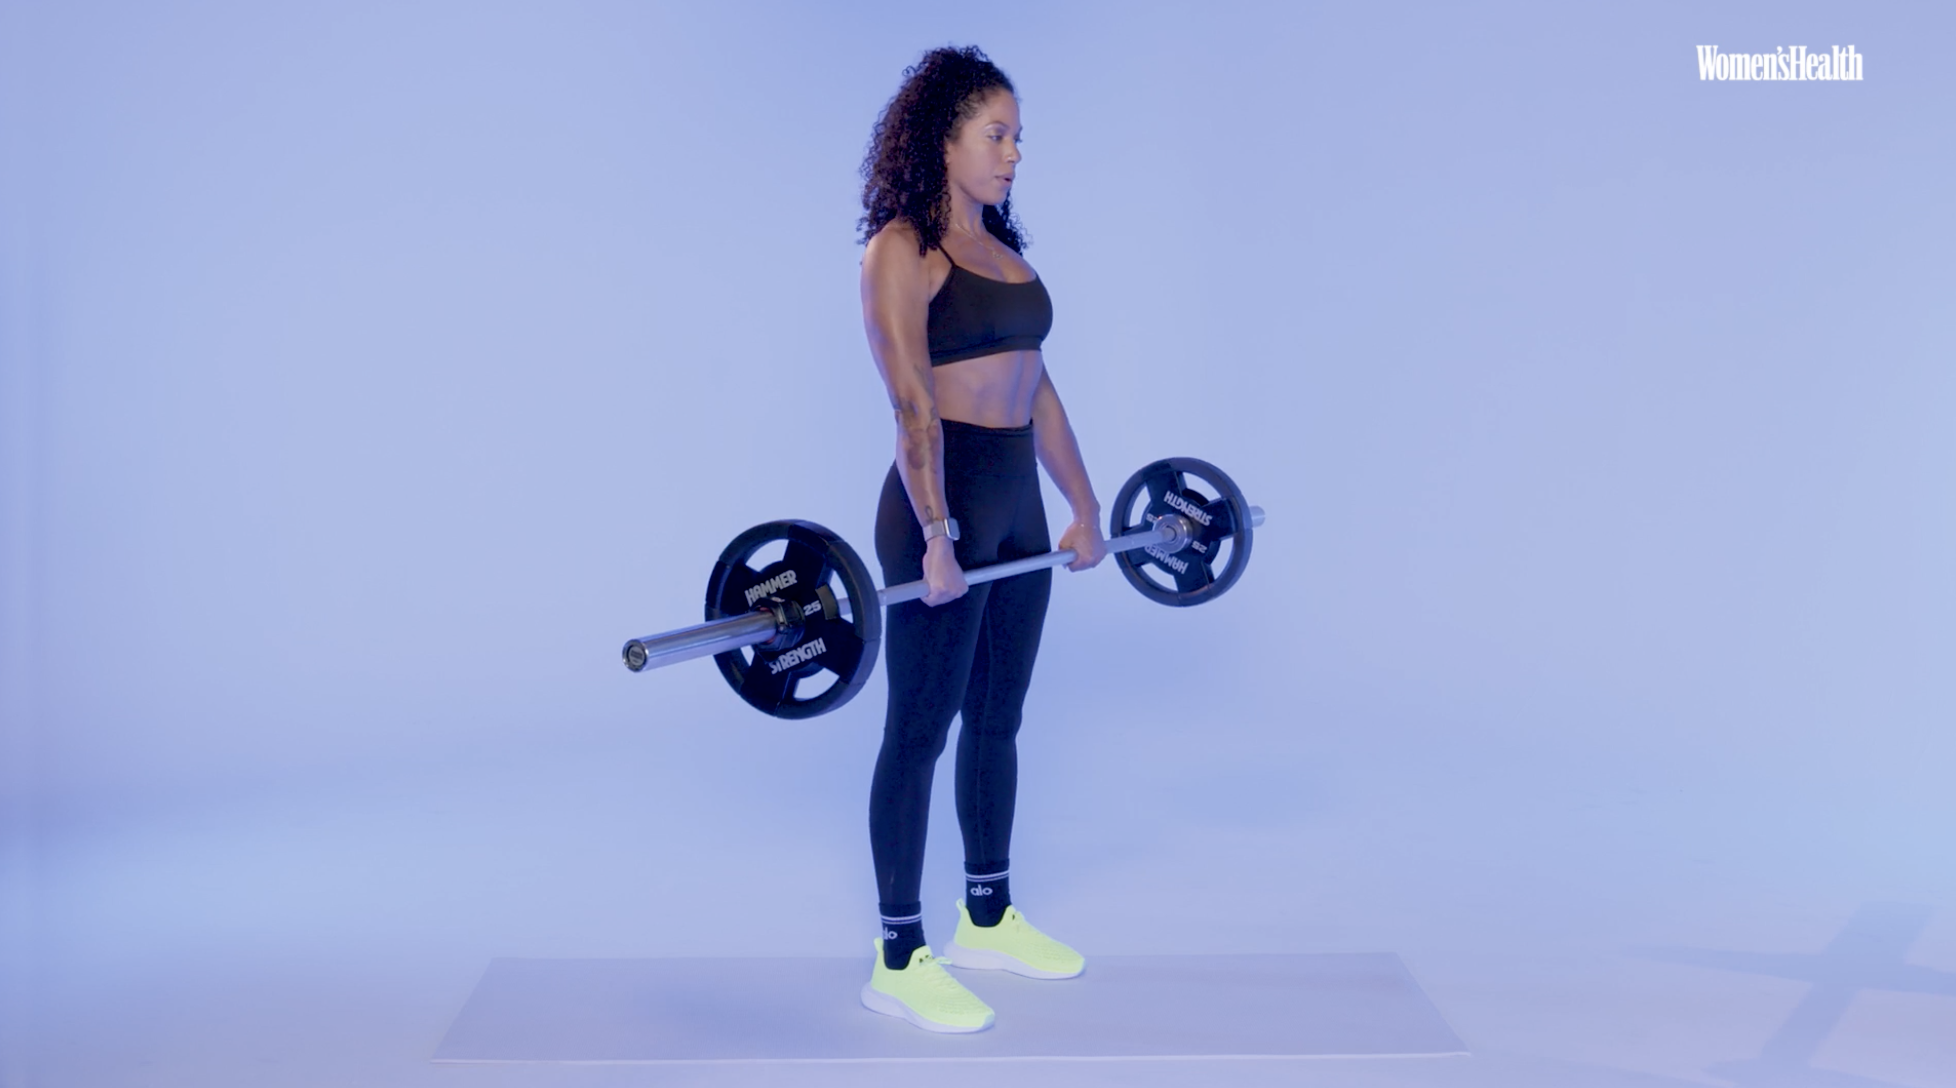 This 5-Pound Dumbbell Workout Will Give You a Total-Body Burn